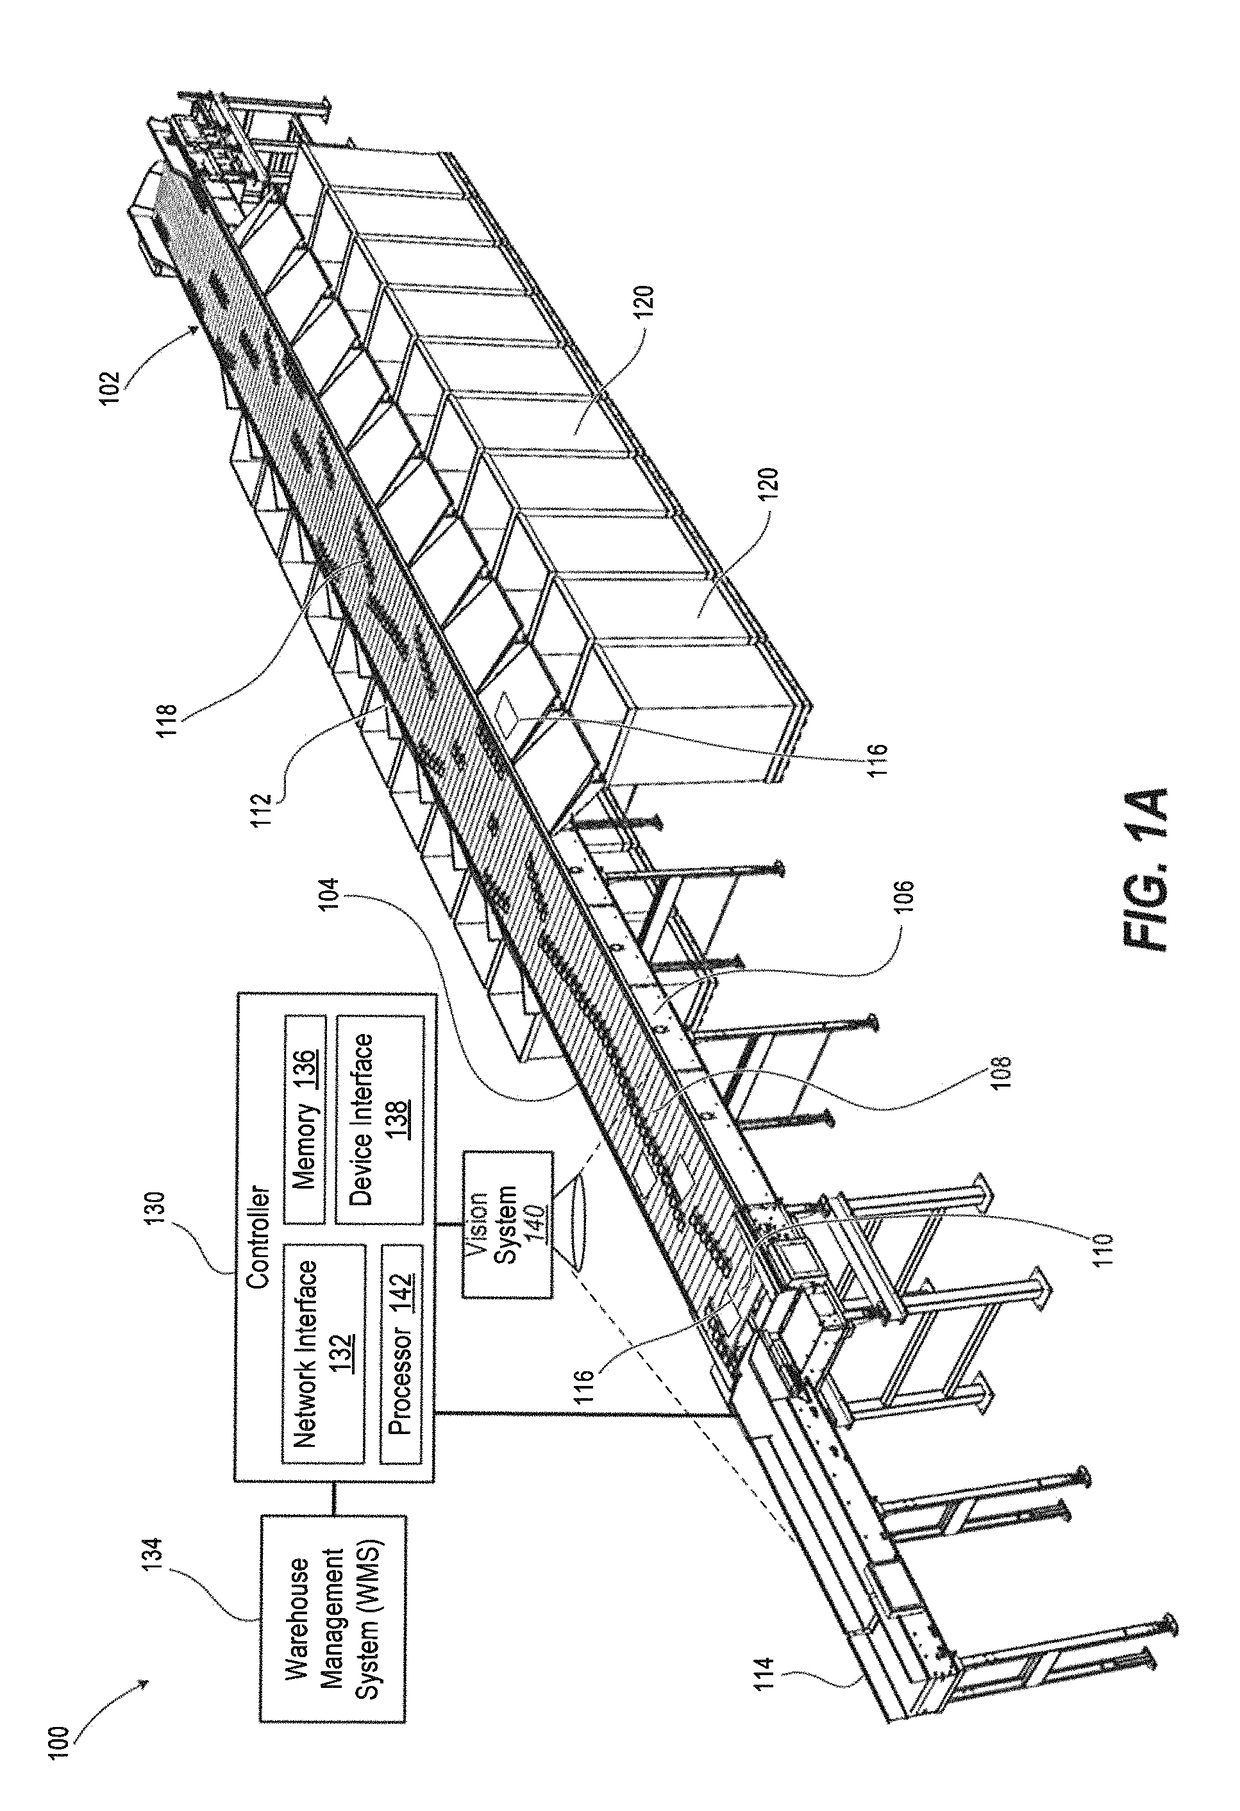 High-speed, dual-sided shoe sorter with offset induct